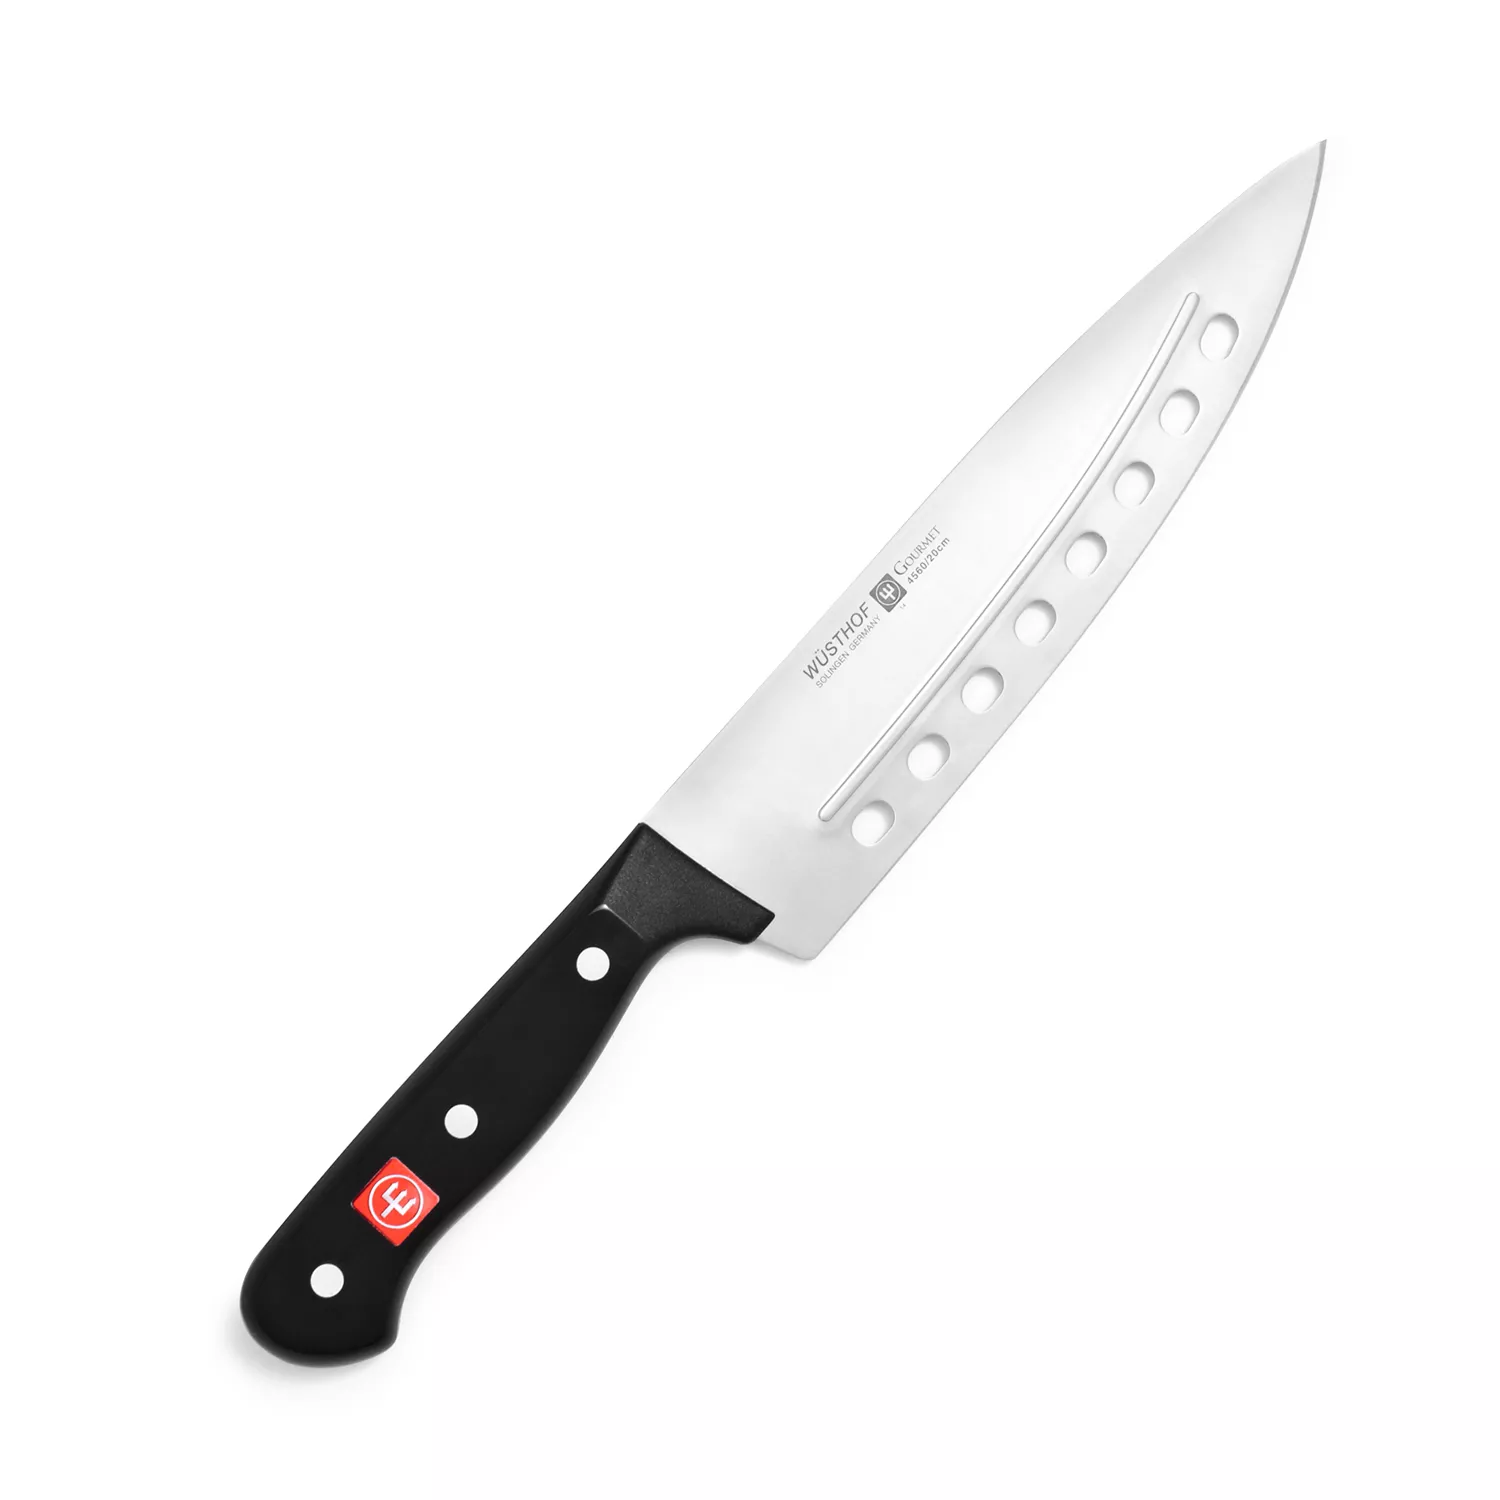 Wusthof 8 Cook's Knife — The Kitchen by Vangura